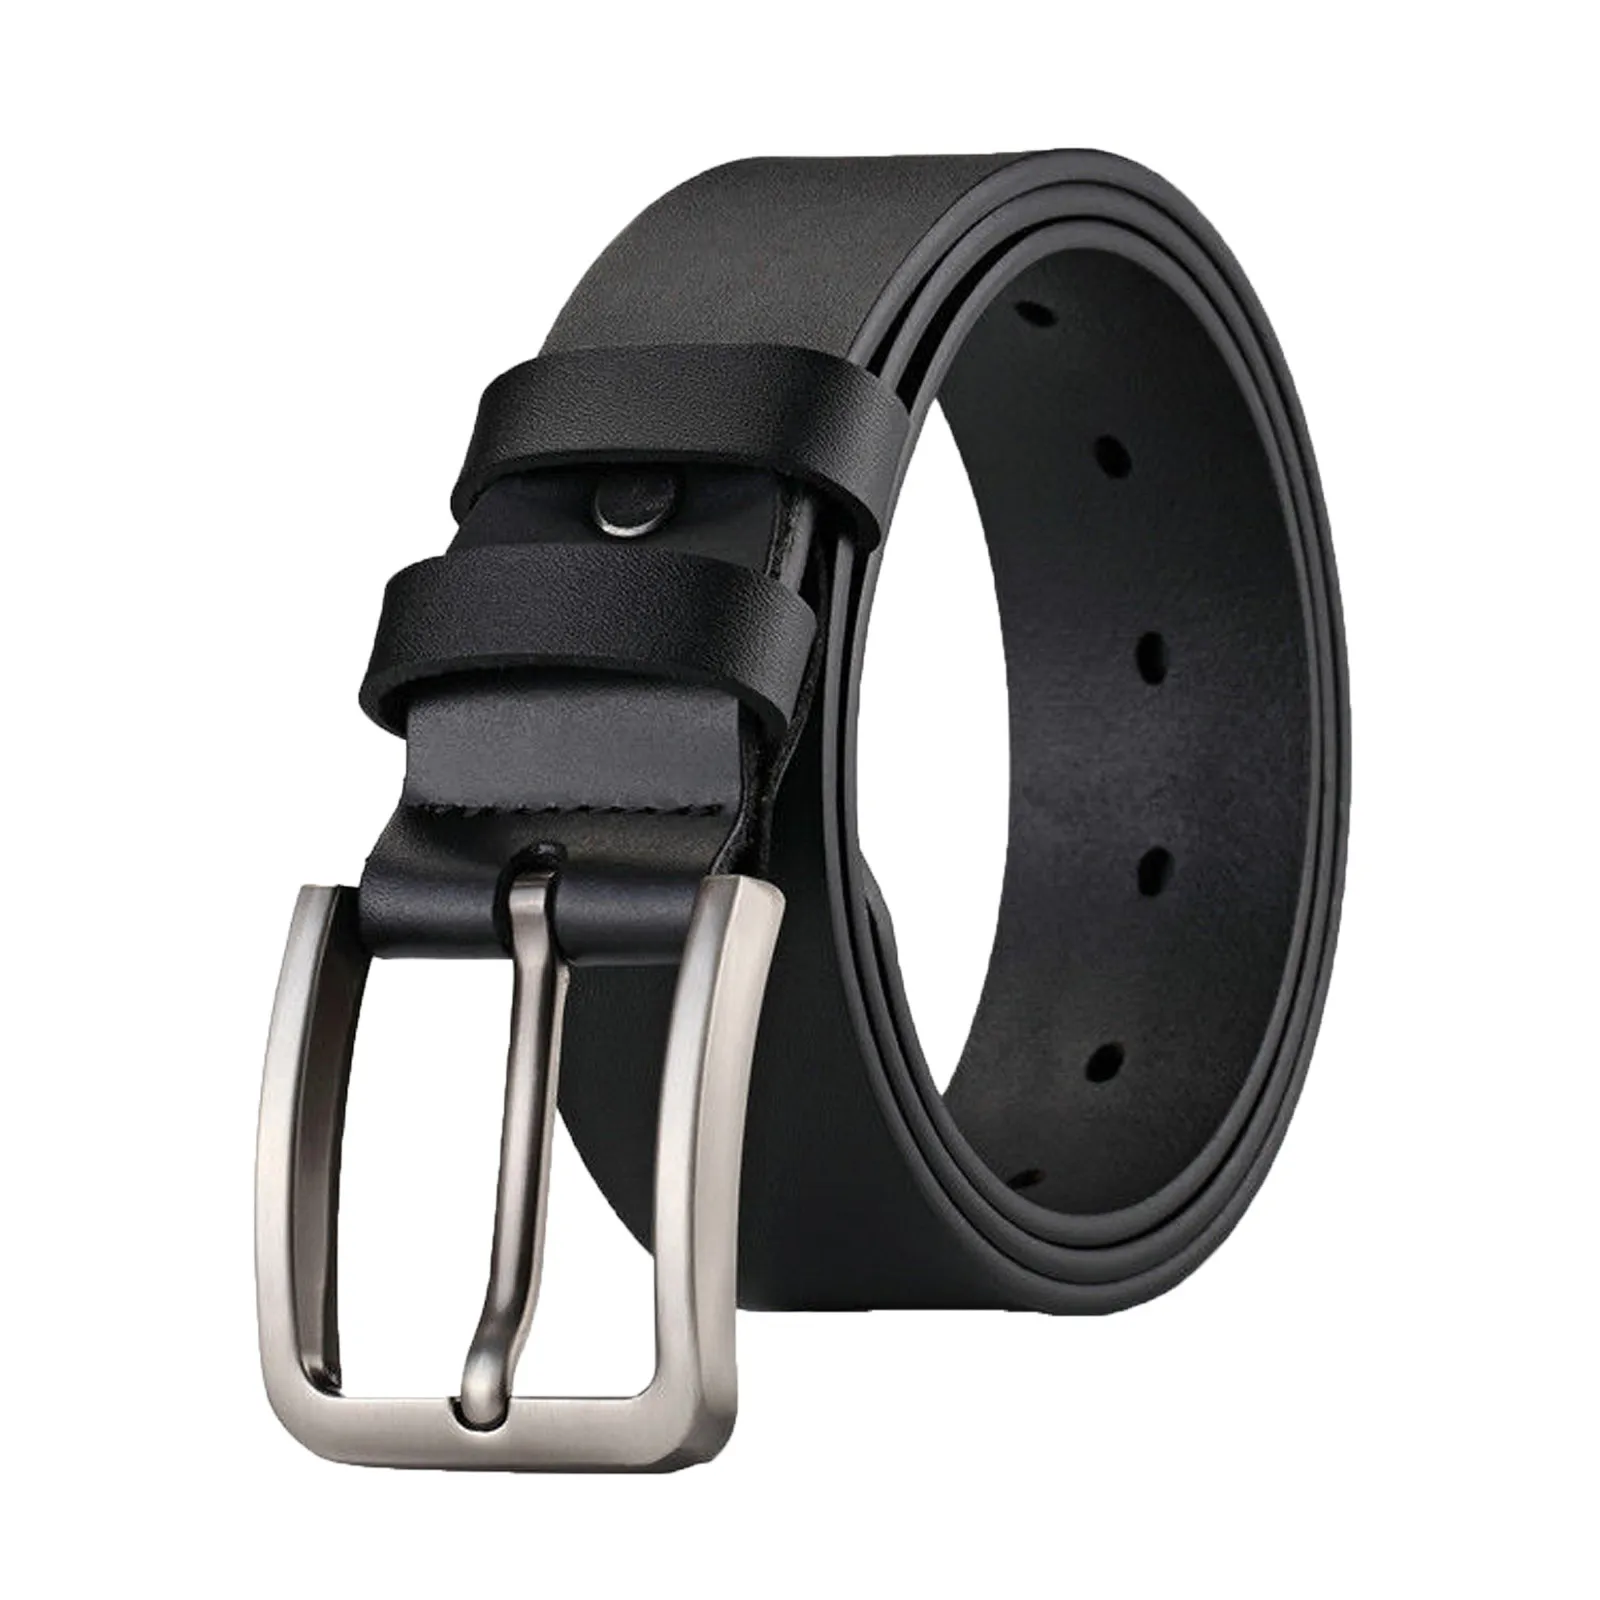 Fashion Wild Pu Leather Belts For Men Classic Luxury Band Black Cowhide Bucket Belt Bussiness Casual Belts Jeans Pants Waistband